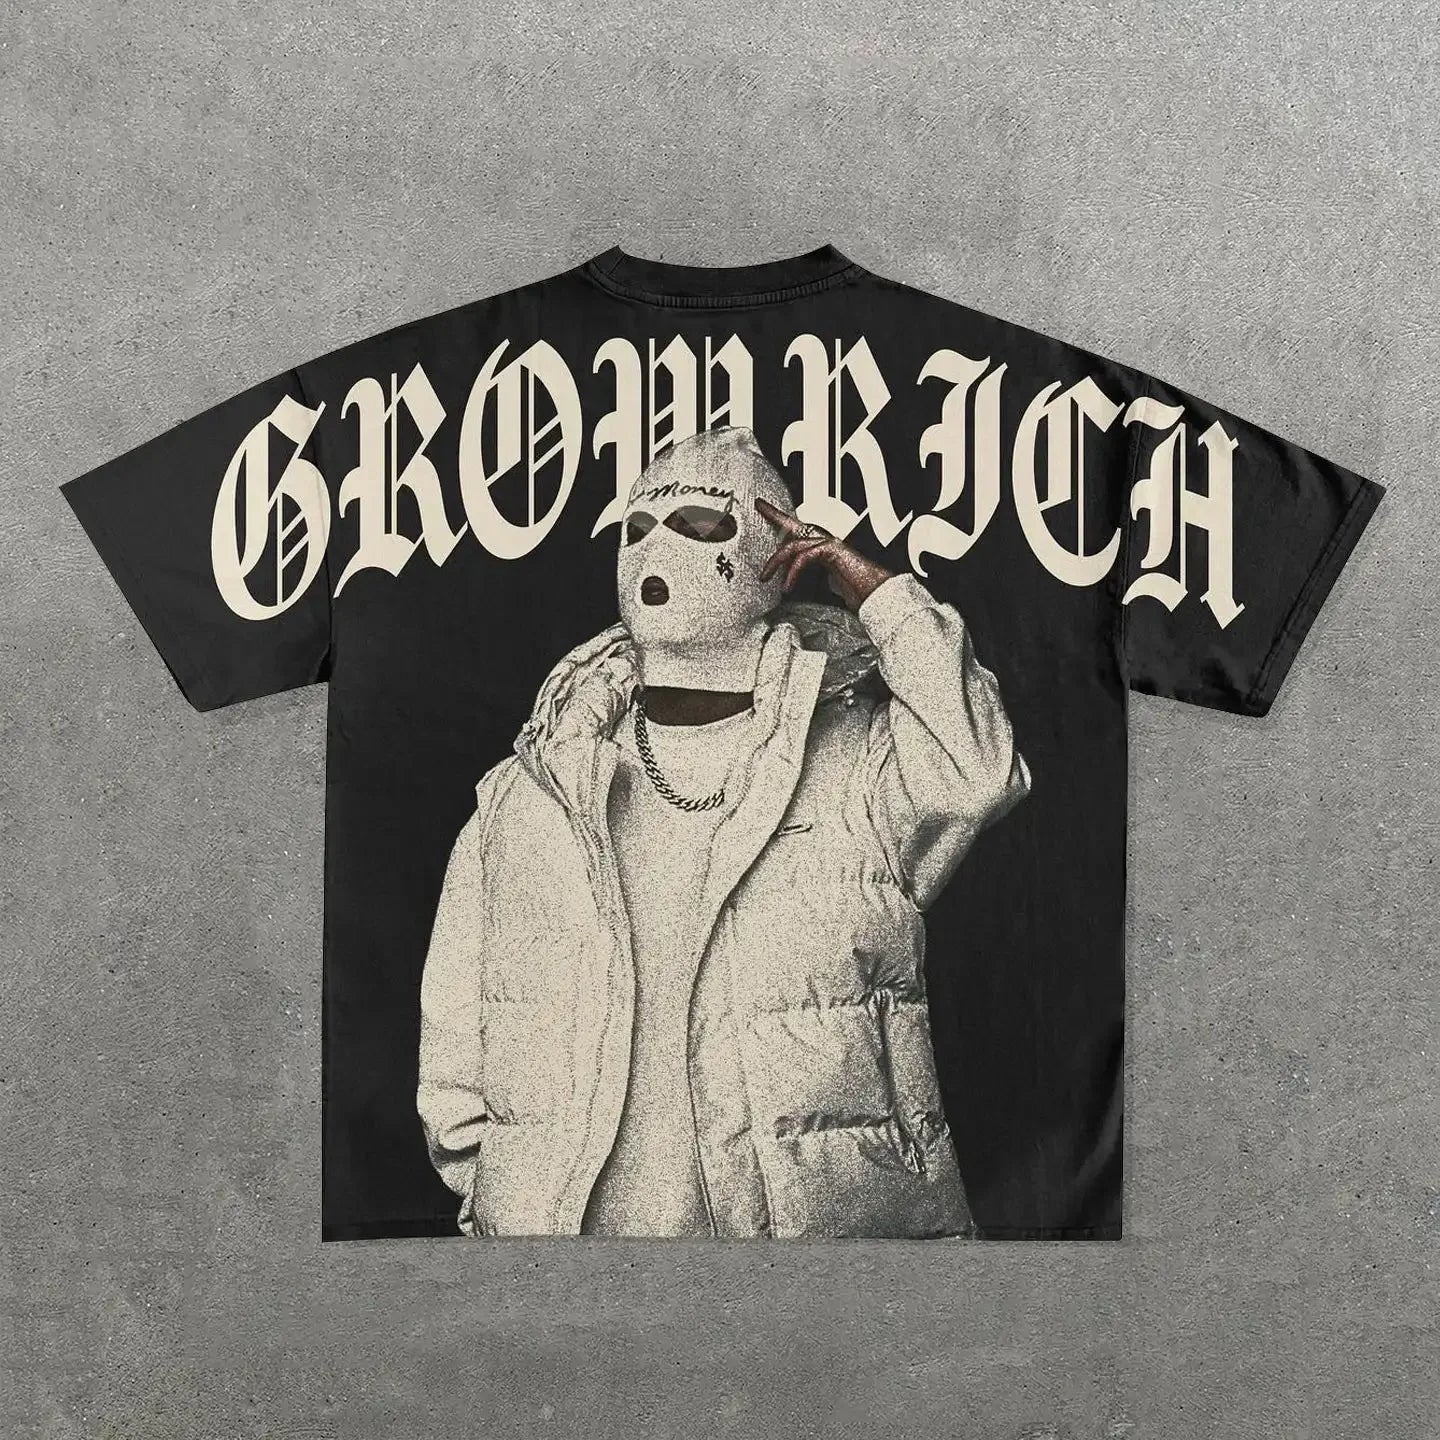 Black t-shirt with "GROW RICH" in large bold text and an image of a person wearing a ski mask, puffy jacket, and necklace, standing against a gray background. This Maramalive™ Punk Hip Hop Graphic T Shirts Mens Vintage Y2k Top Goth Oversized T Shirt Fashion Loose Casual Short Sleeve Streetwear melds modern streetwear with retro aesthetics for a striking look.